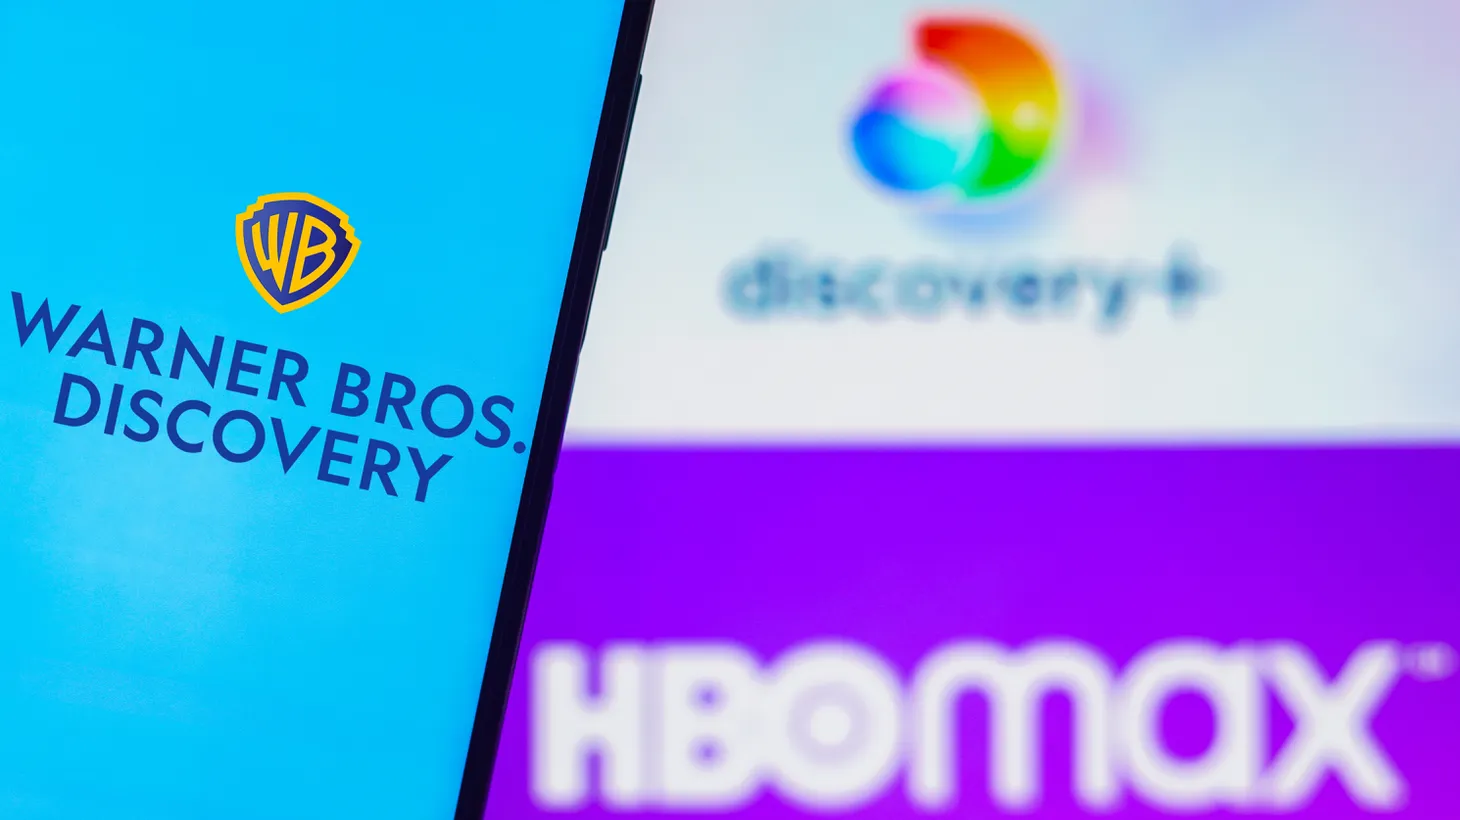 “The goal now is that there's this service ‘Max’ that anyone can subscribe to, and anyone is going to be satisfied,” says Matt Belloni of Puck News about the merging streaming services of HBO Max and Discovery+.